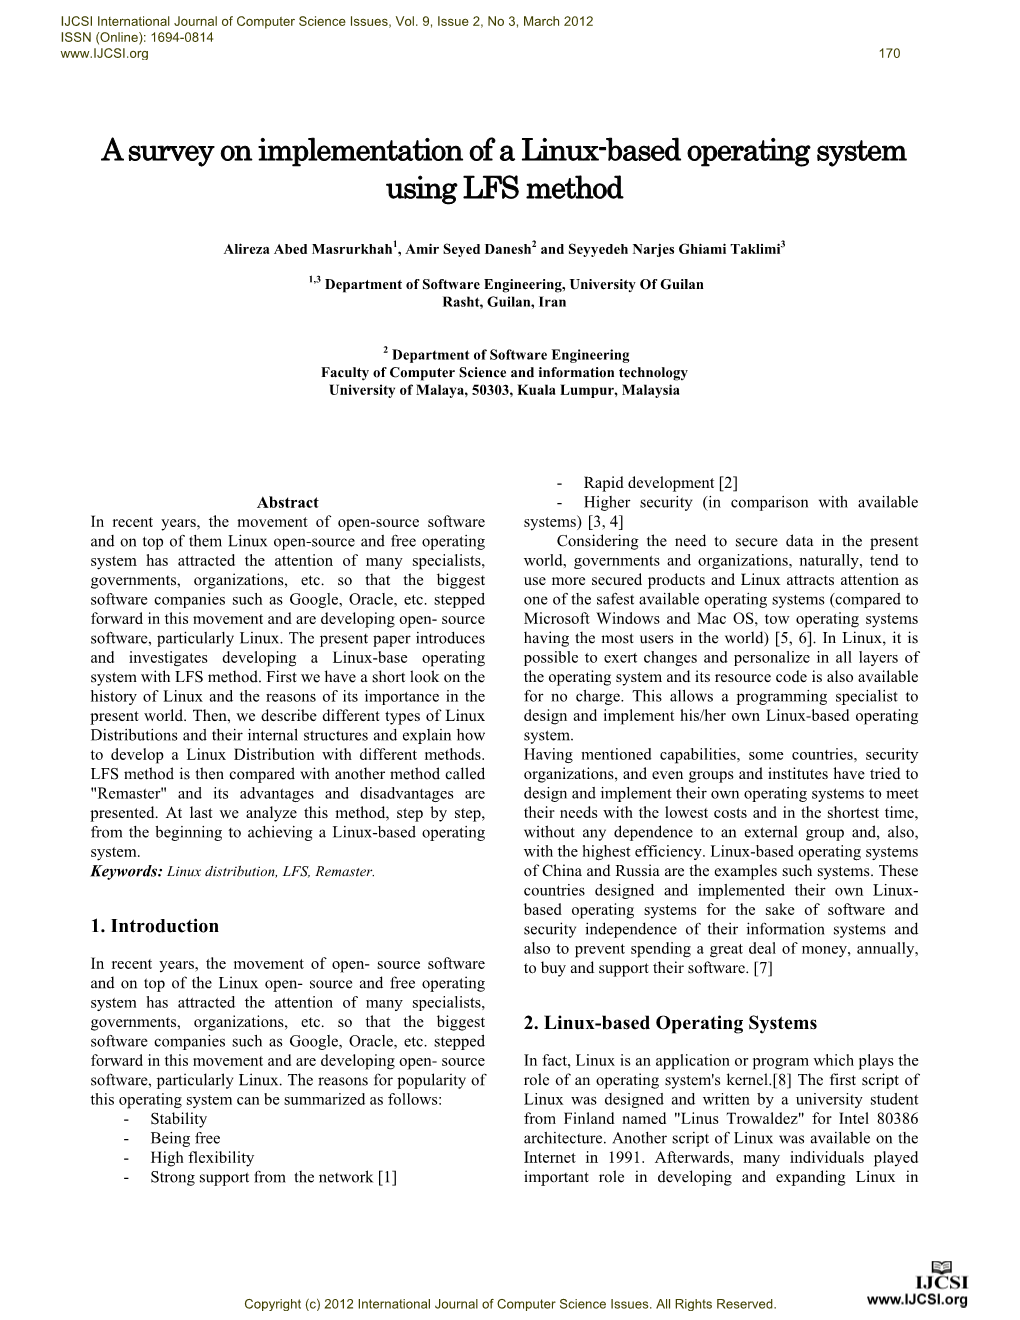 A Survey on Implementation of a Linux-Based Operating System Using LFS Method